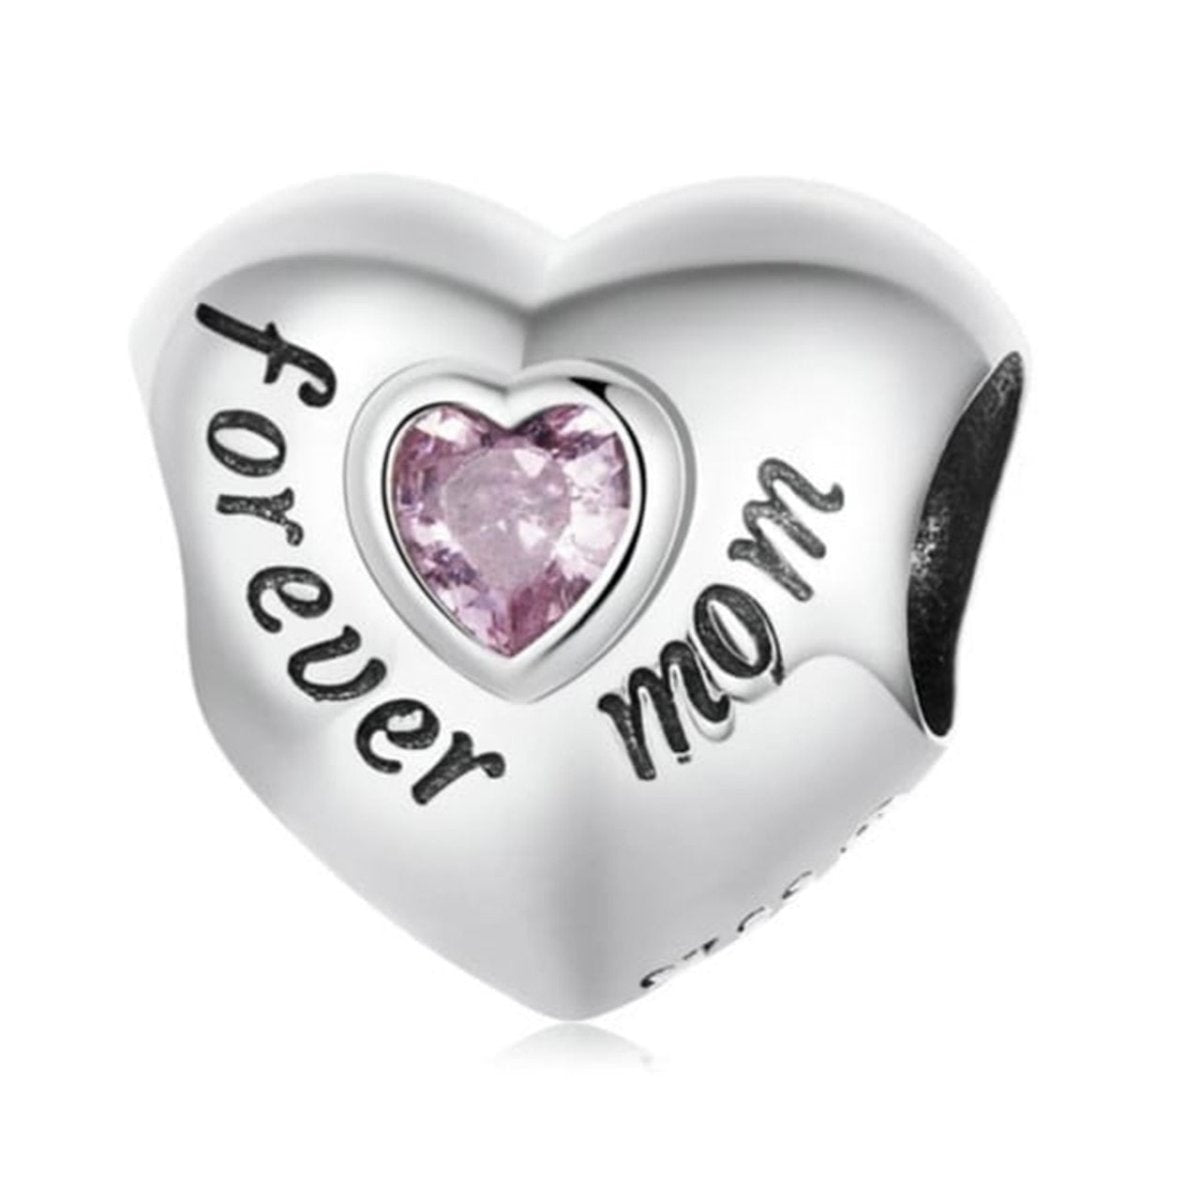 Strling Silver Forever Mom Heart Charm - Enchanting Charms